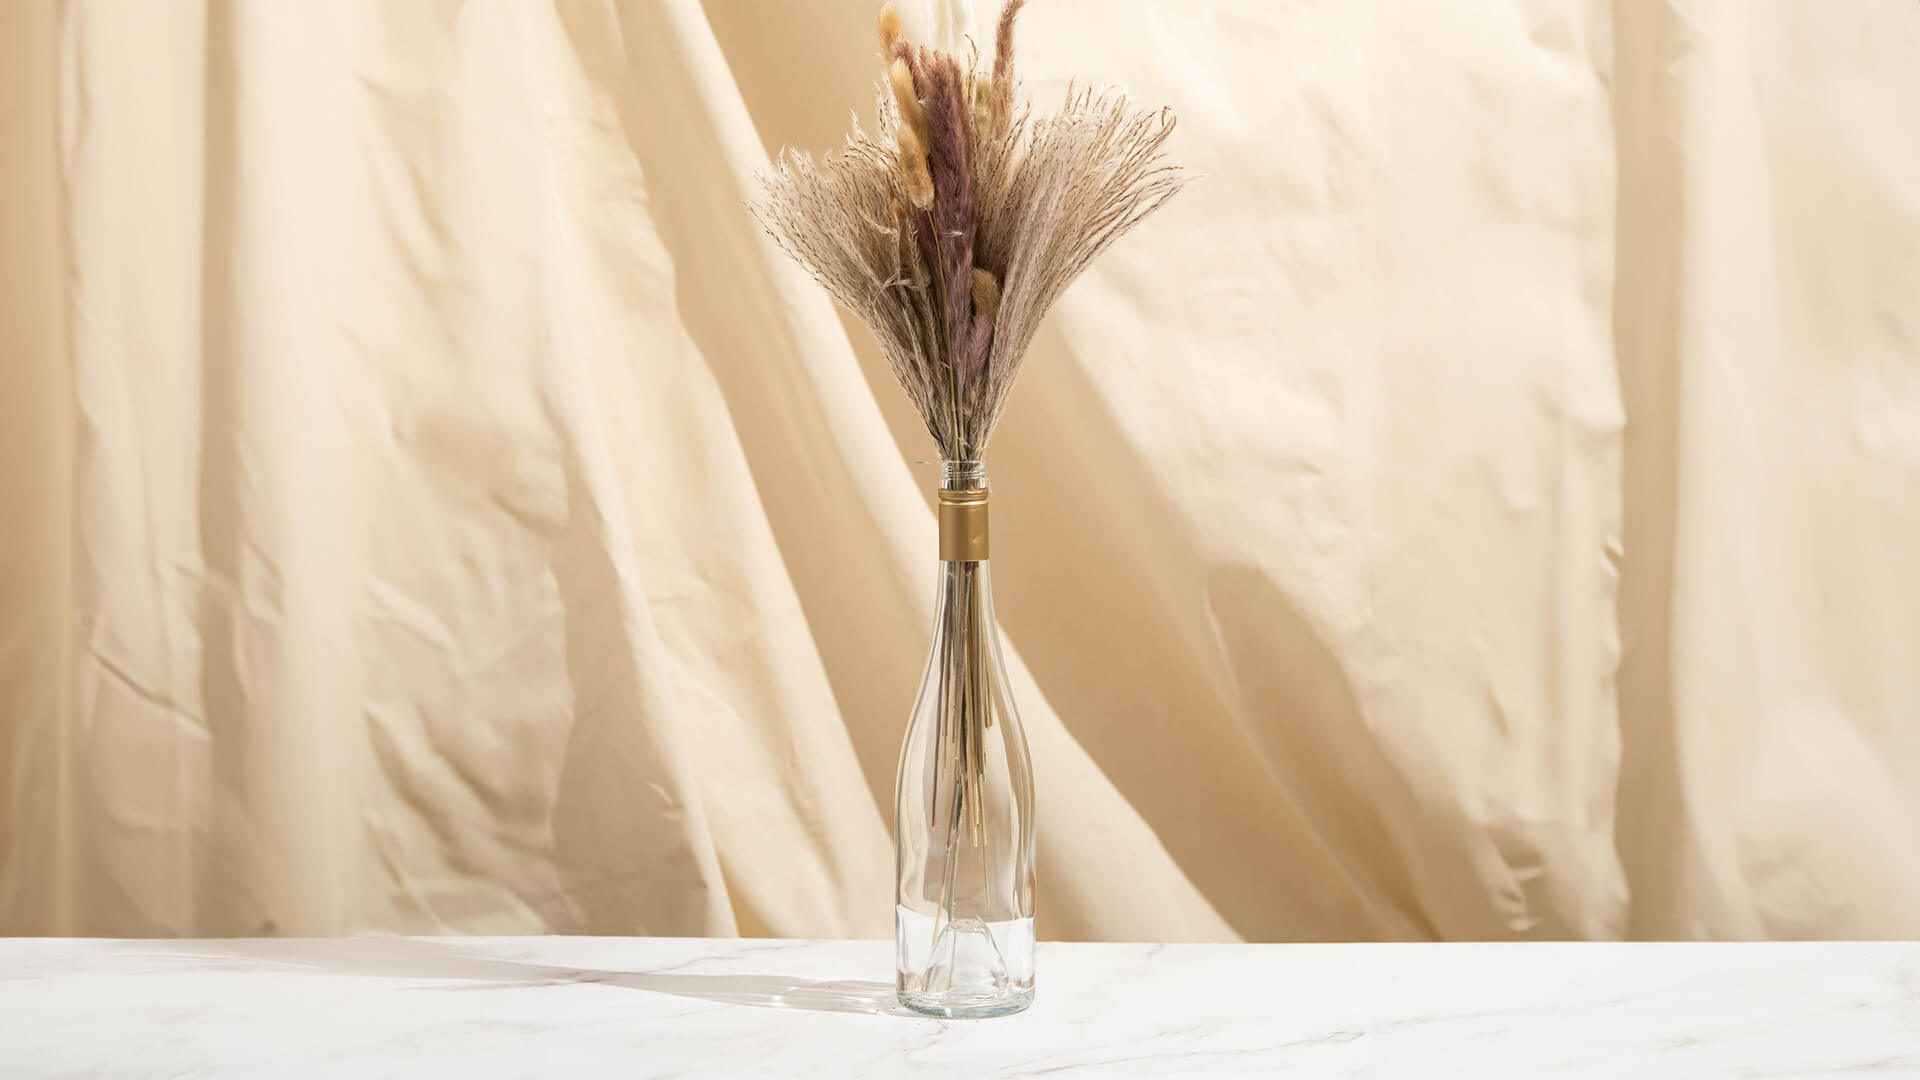 An empty Saintly wine bottle being used as a flower vase.